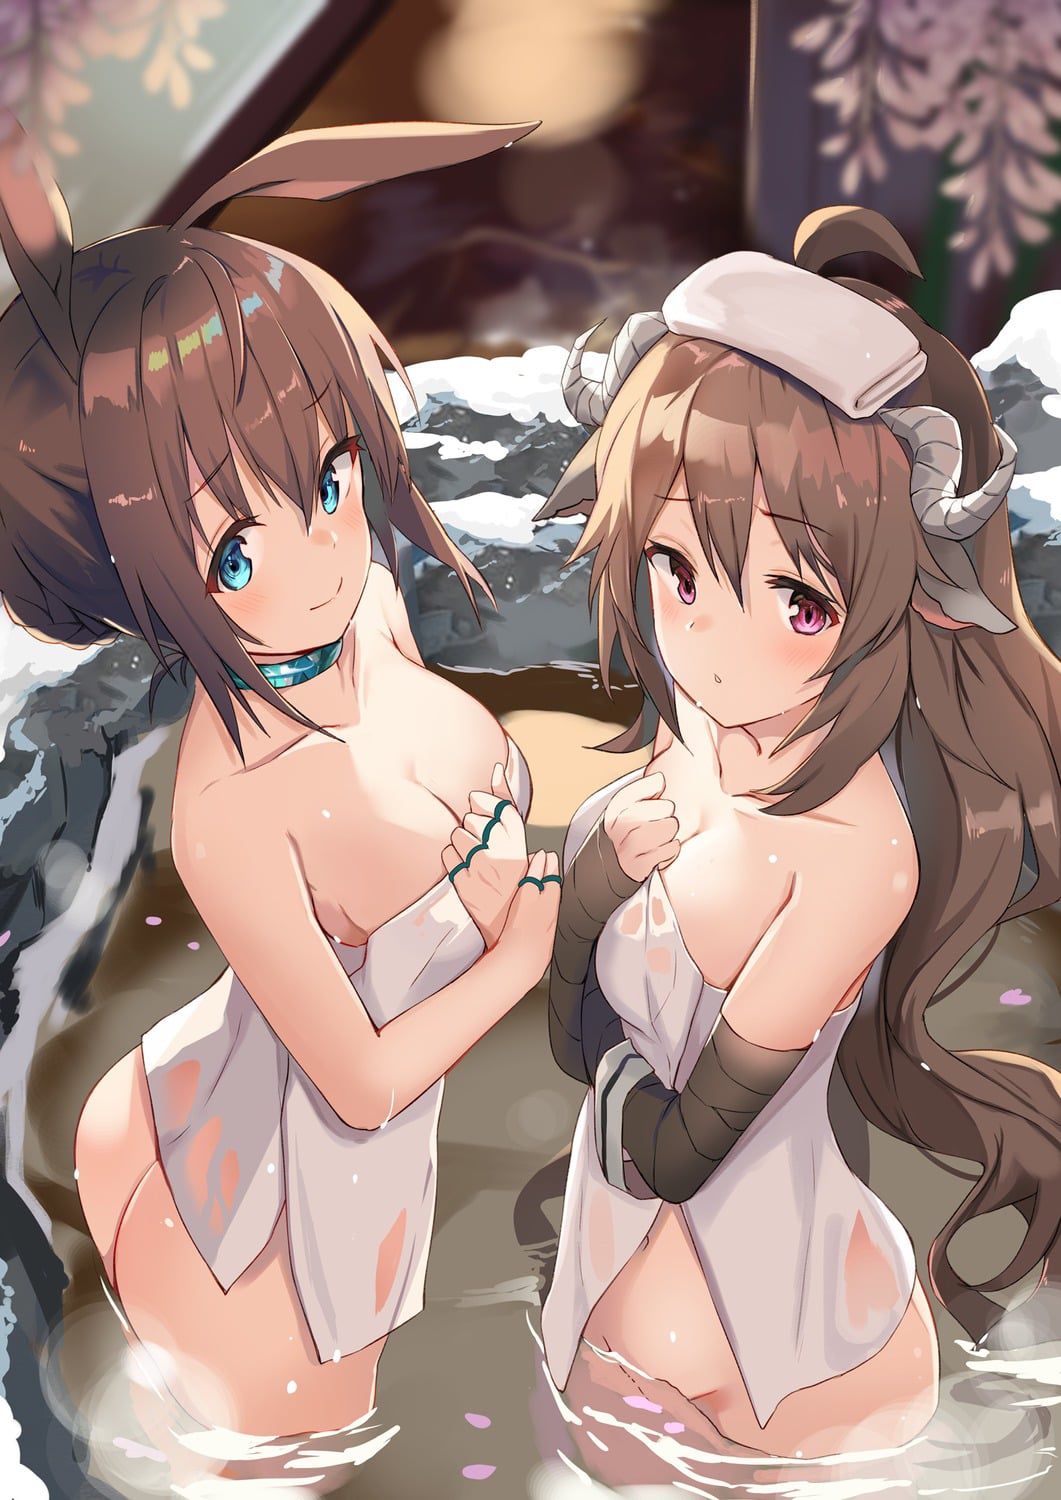 Let's gaze at the bath scene of a defenseless girl during relaxation time! 39